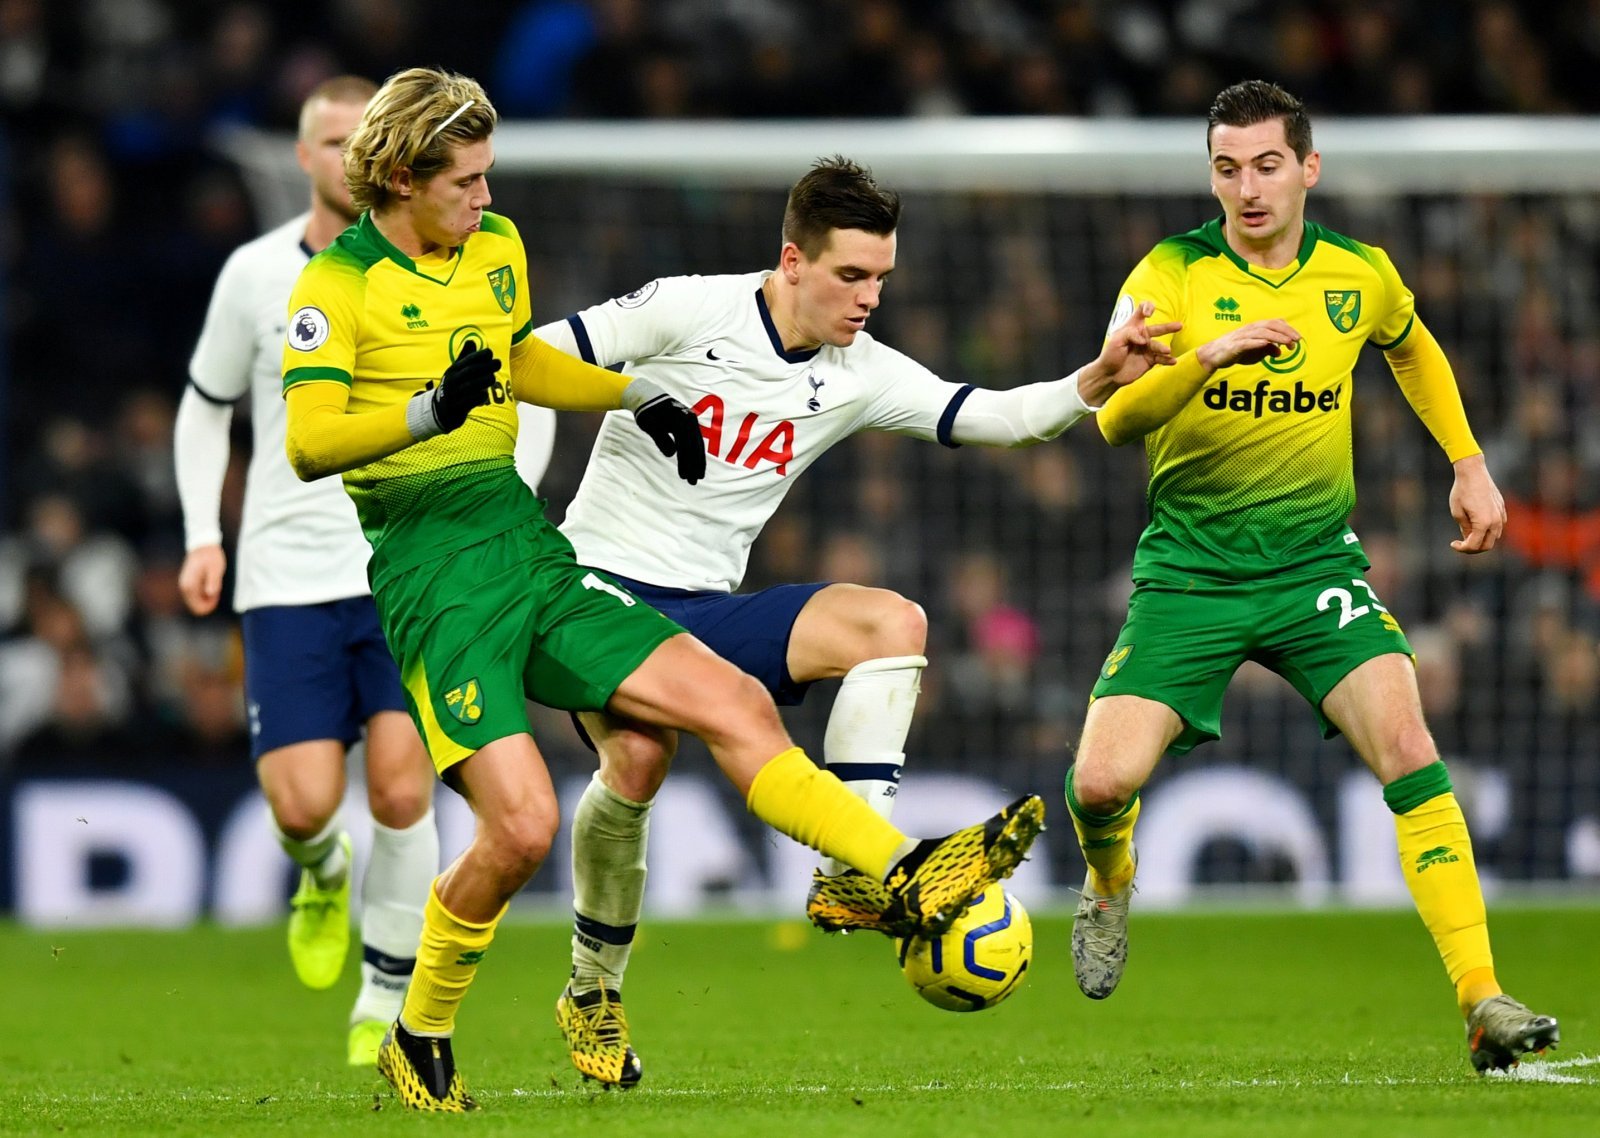 Tottenham Hotspur Spurs set to face Norwich City in friendly thisisfutbol